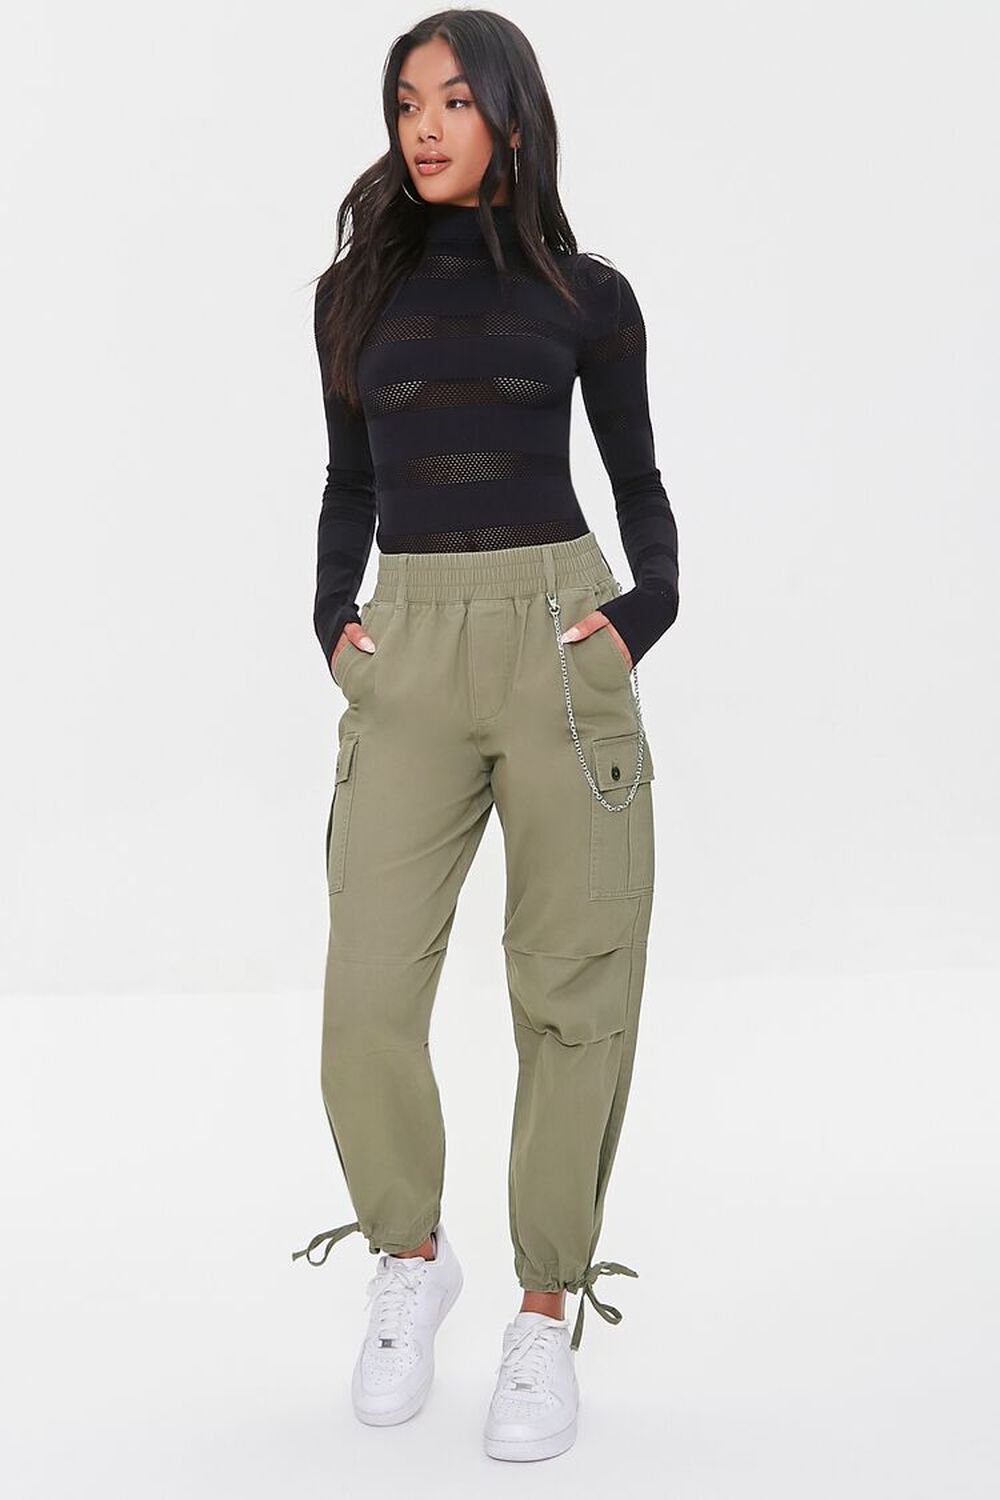 OLIVE Wallet Chain Ankle Pants, image 1